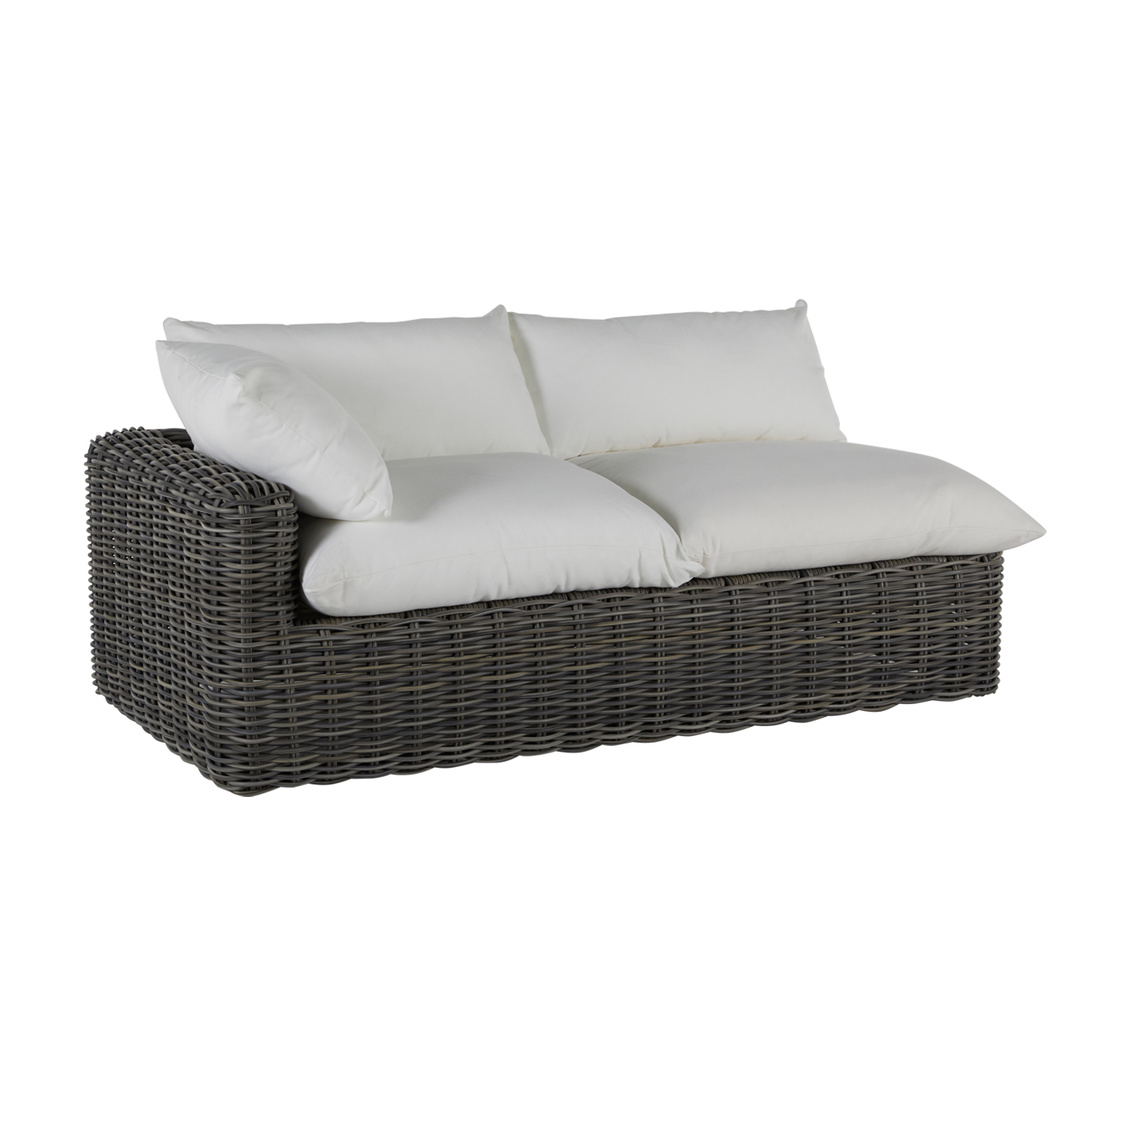 montecito woven left arm facing loveseat in slate grey – frame only product image